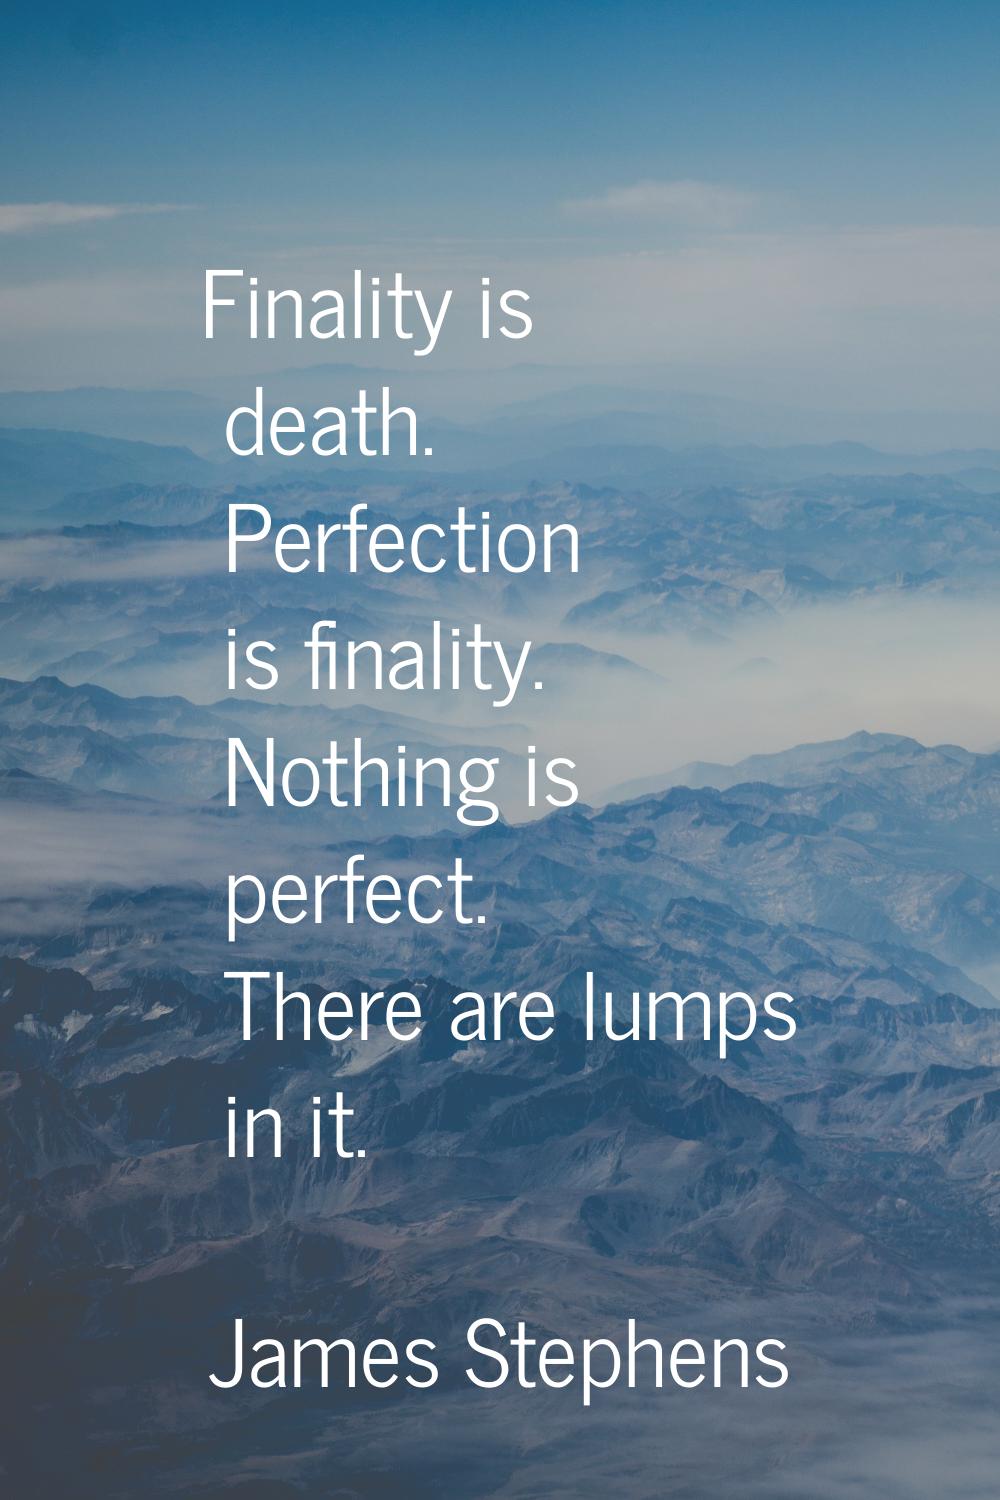 Finality is death. Perfection is finality. Nothing is perfect. There are lumps in it.